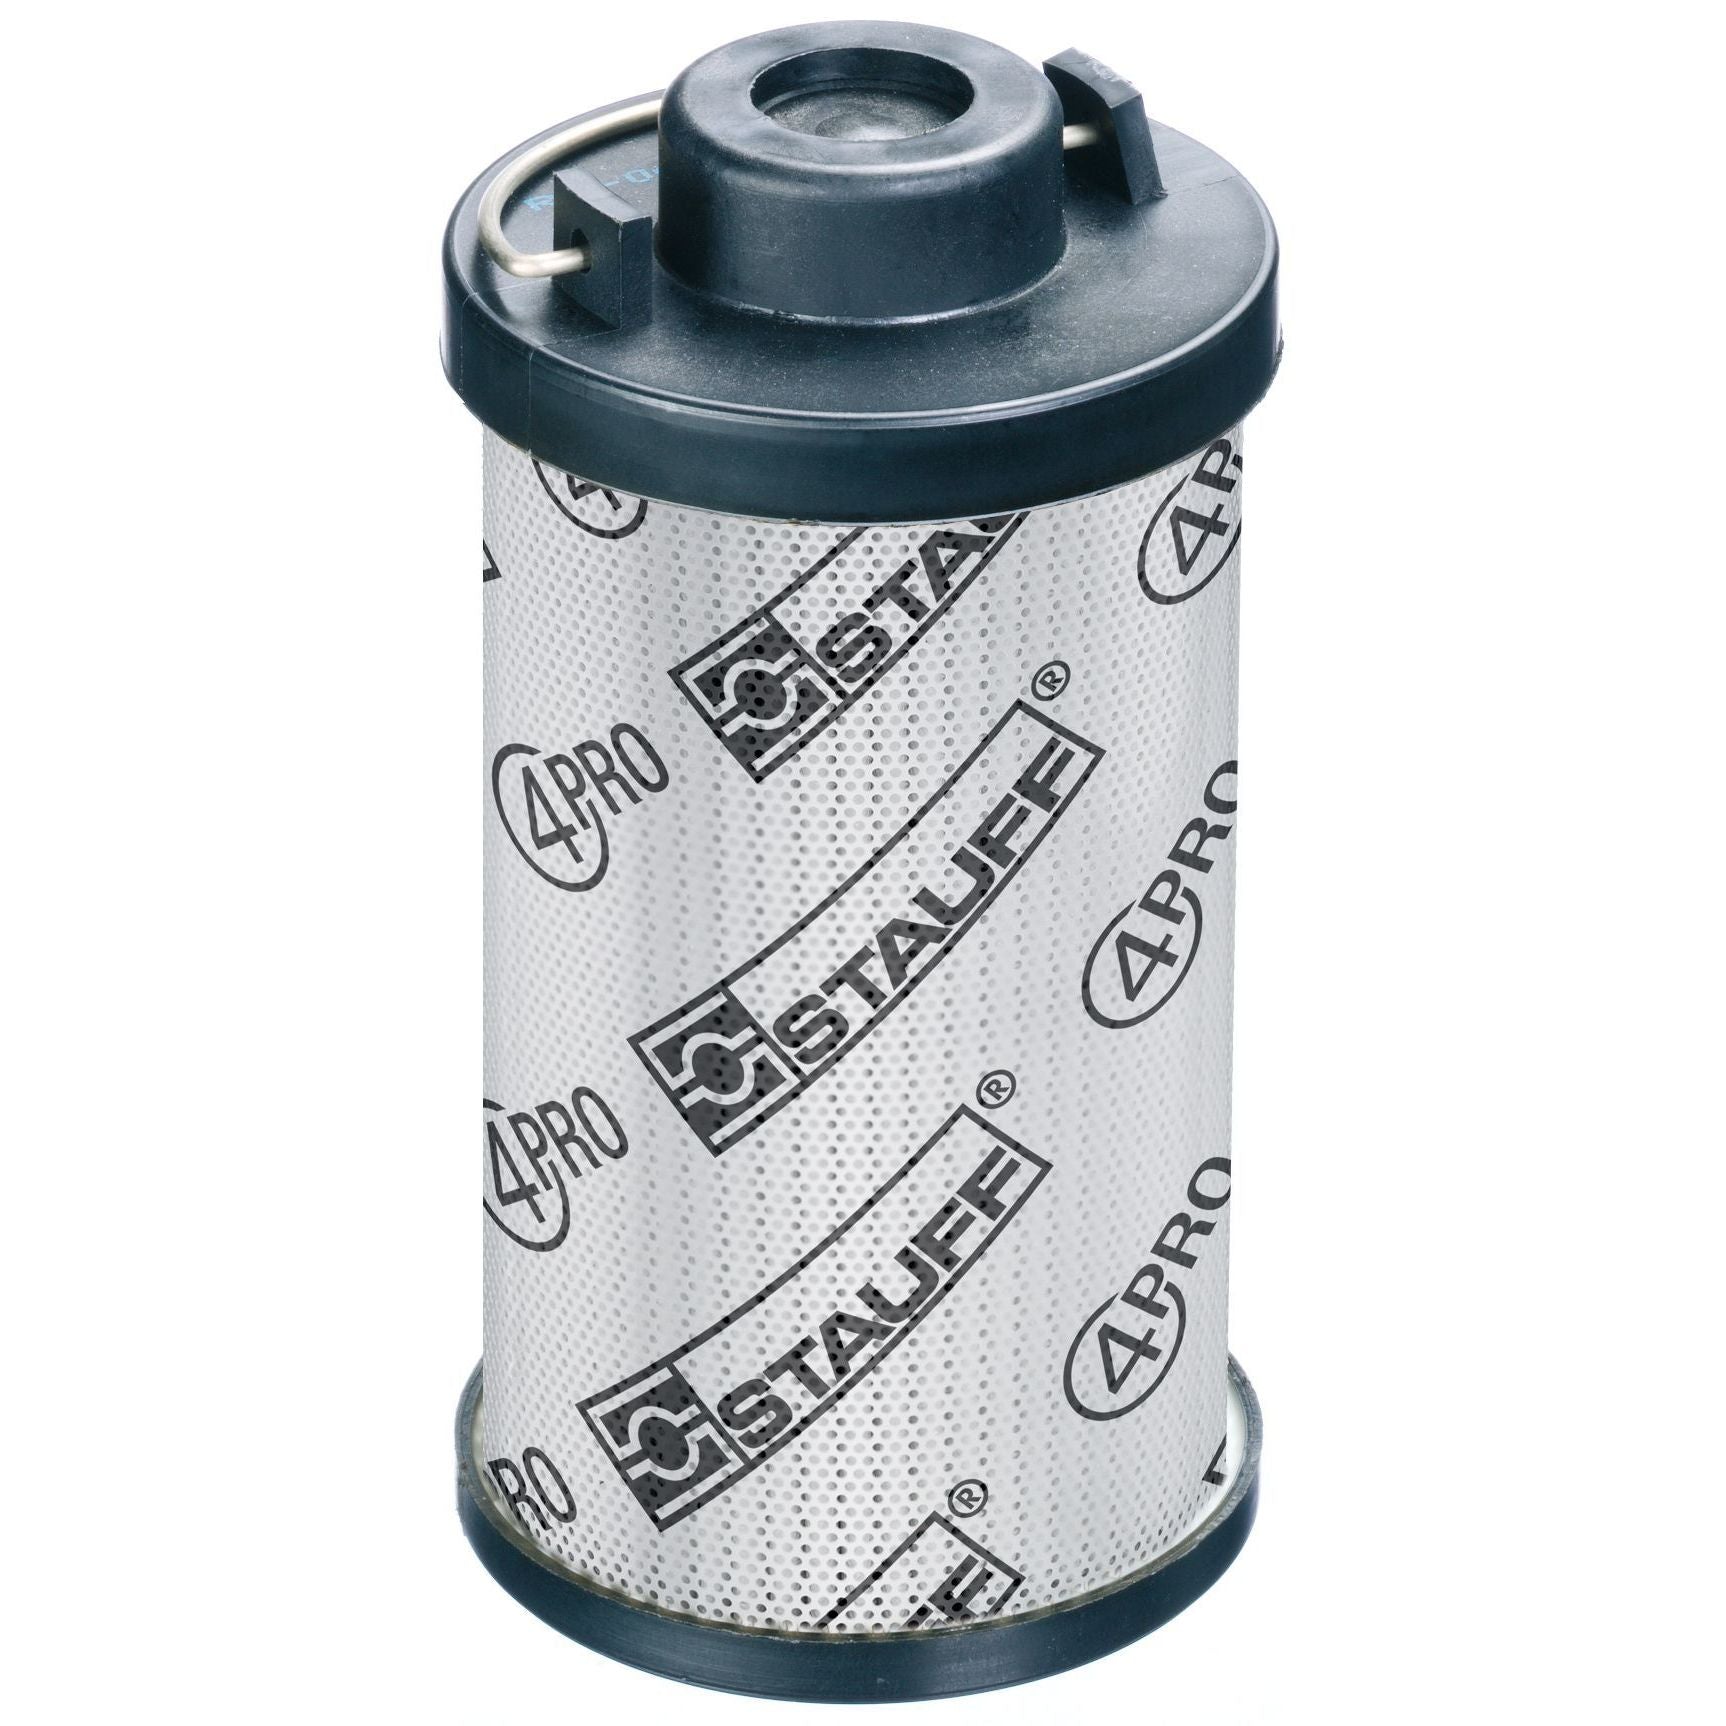 RE-046-G-10-B/4 : Stauff RF-046 Series Filter Element, 10 Micron, Synthetic, 363psi Collapse Differential, Buna